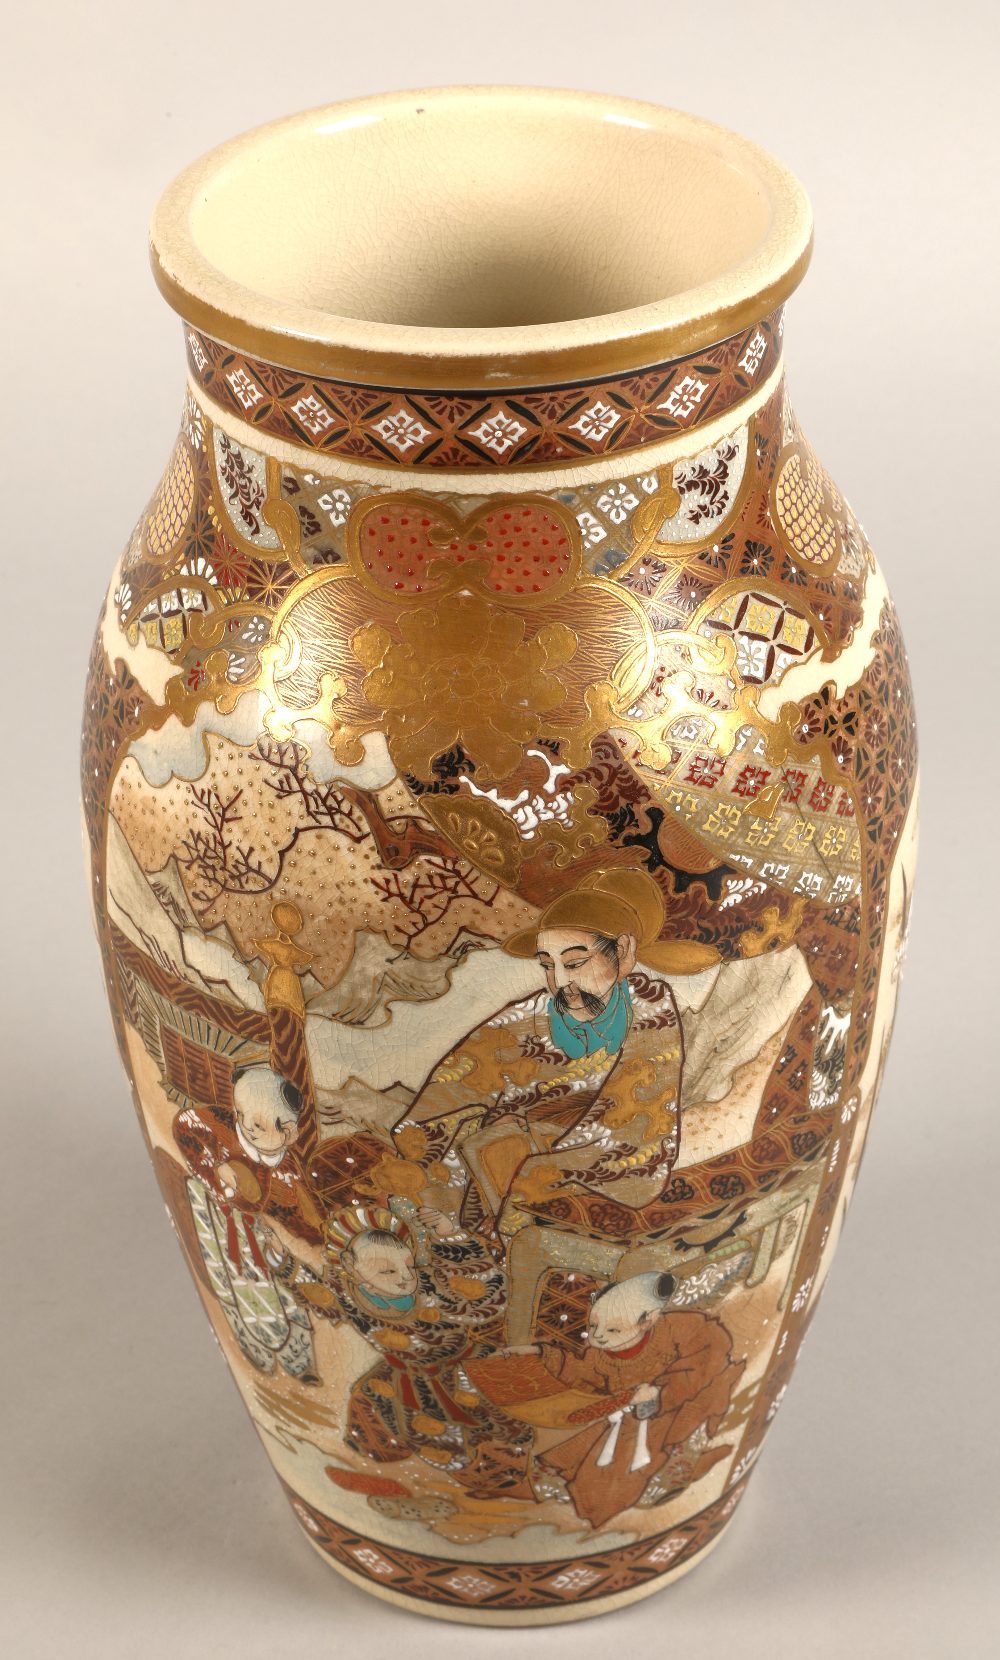 Japanese satsuma vase Meiji period, decorated in panels, with children in a garden, 30cm high. - Image 6 of 11